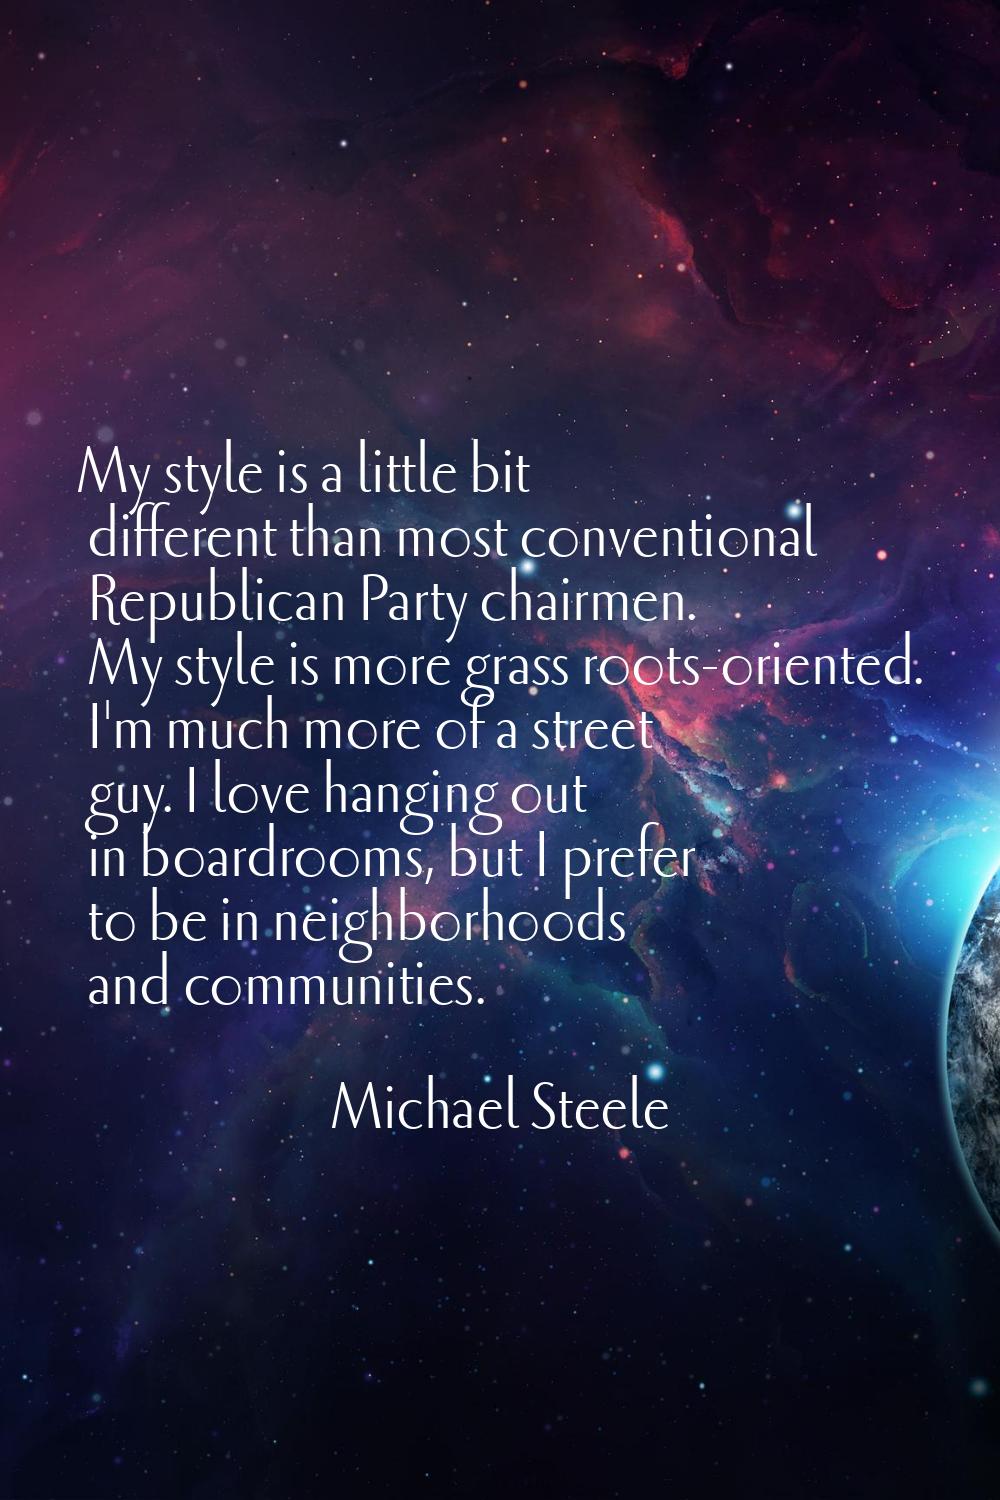 My style is a little bit different than most conventional Republican Party chairmen. My style is mo